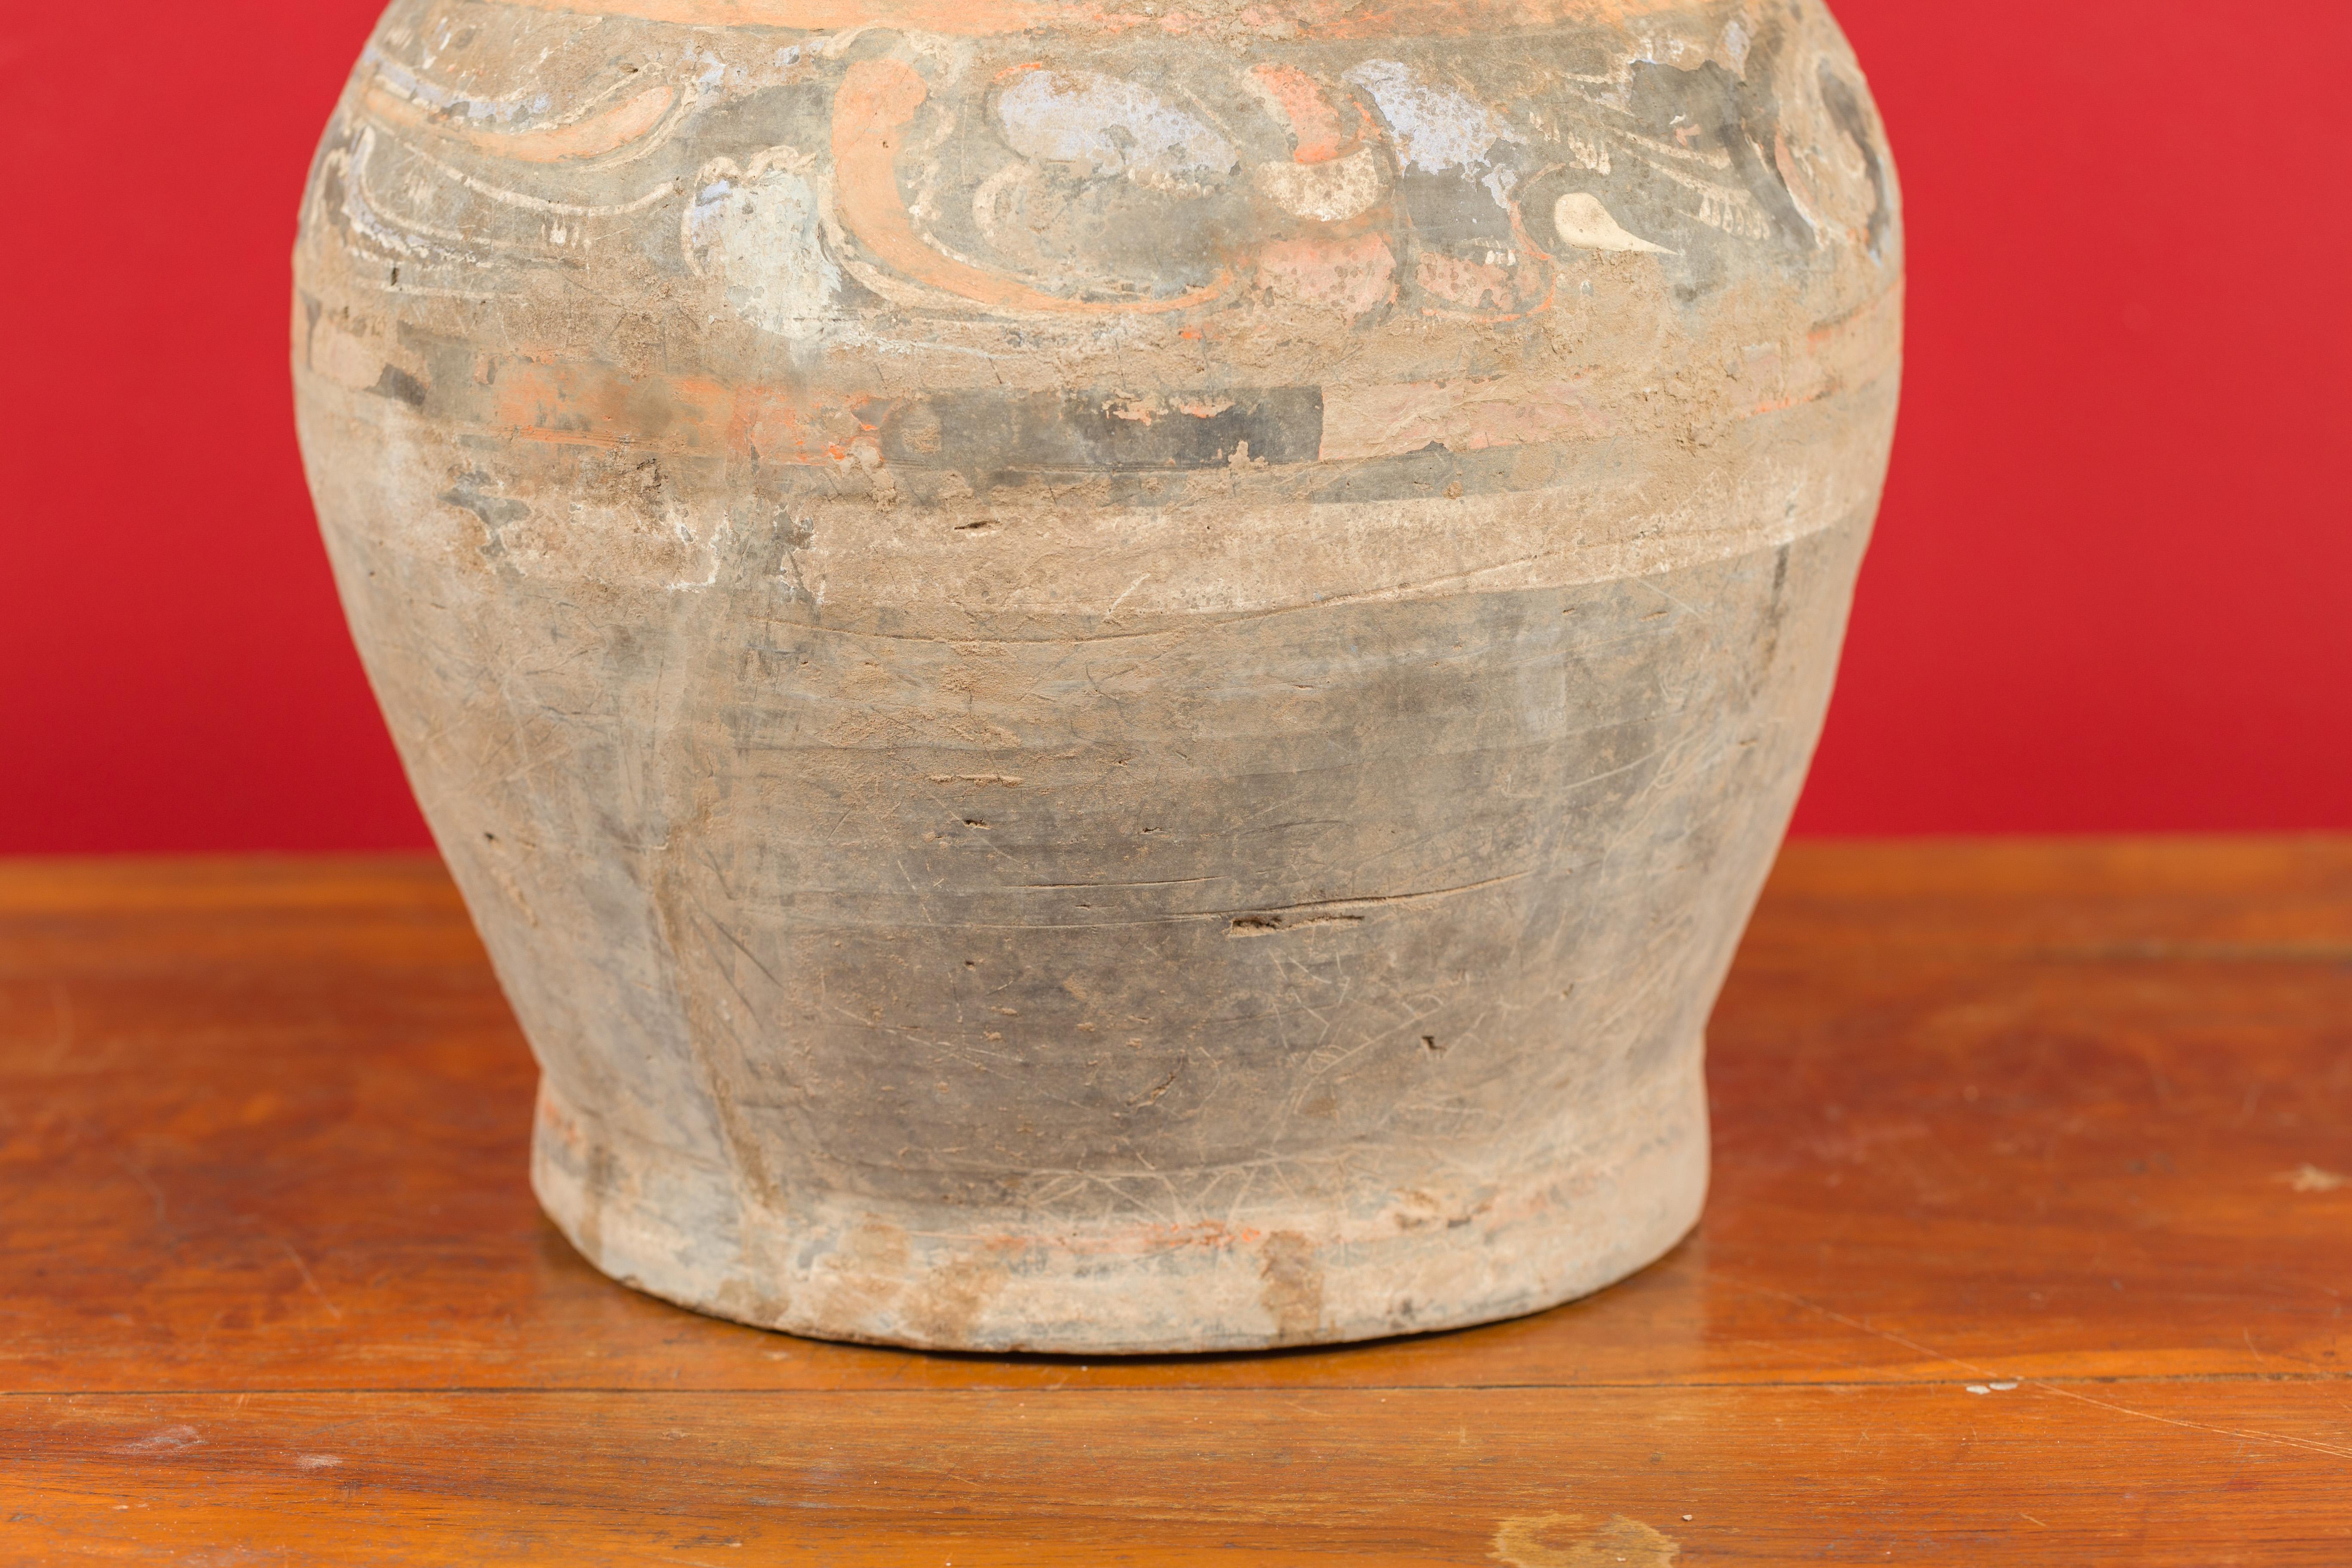 Chinese Han Dynasty Terracotta Hu Vessel with Original Paint circa 202 BC-200 AD 2